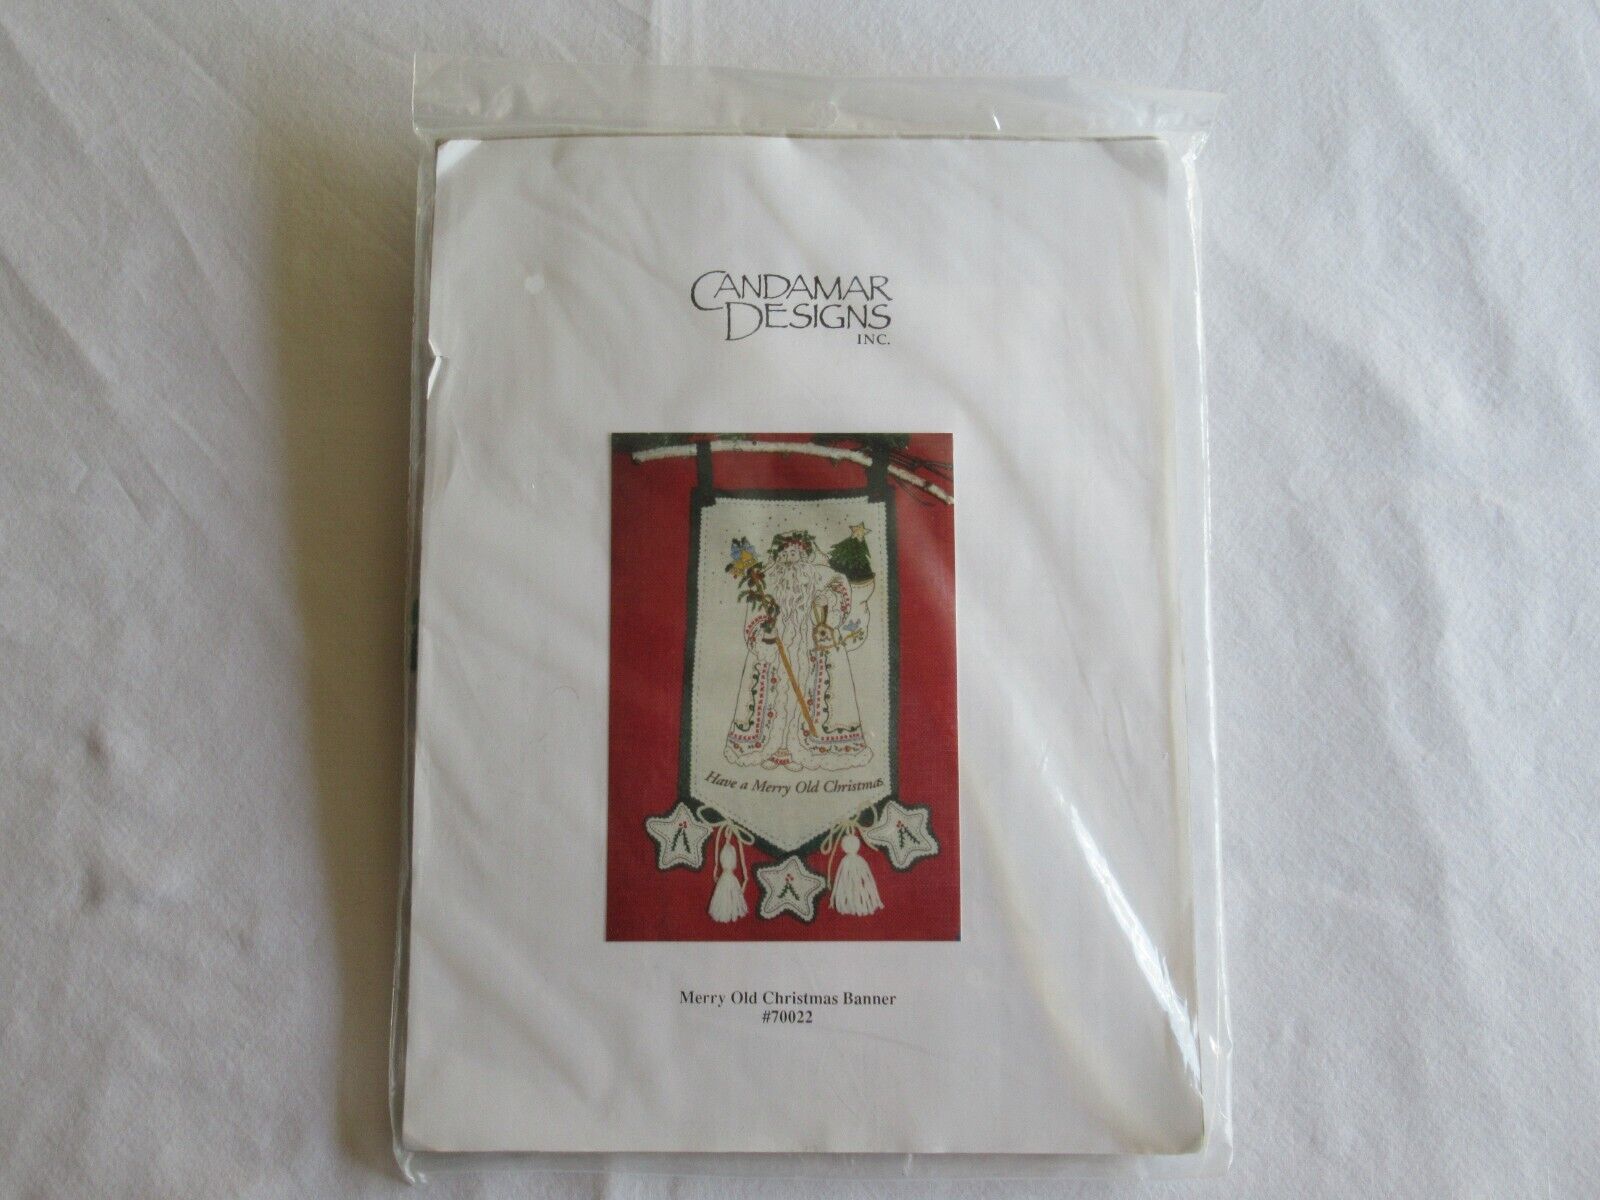 Merry Old Christmas Banner - Embroidery Kit - Candamar #70022 - $18.00